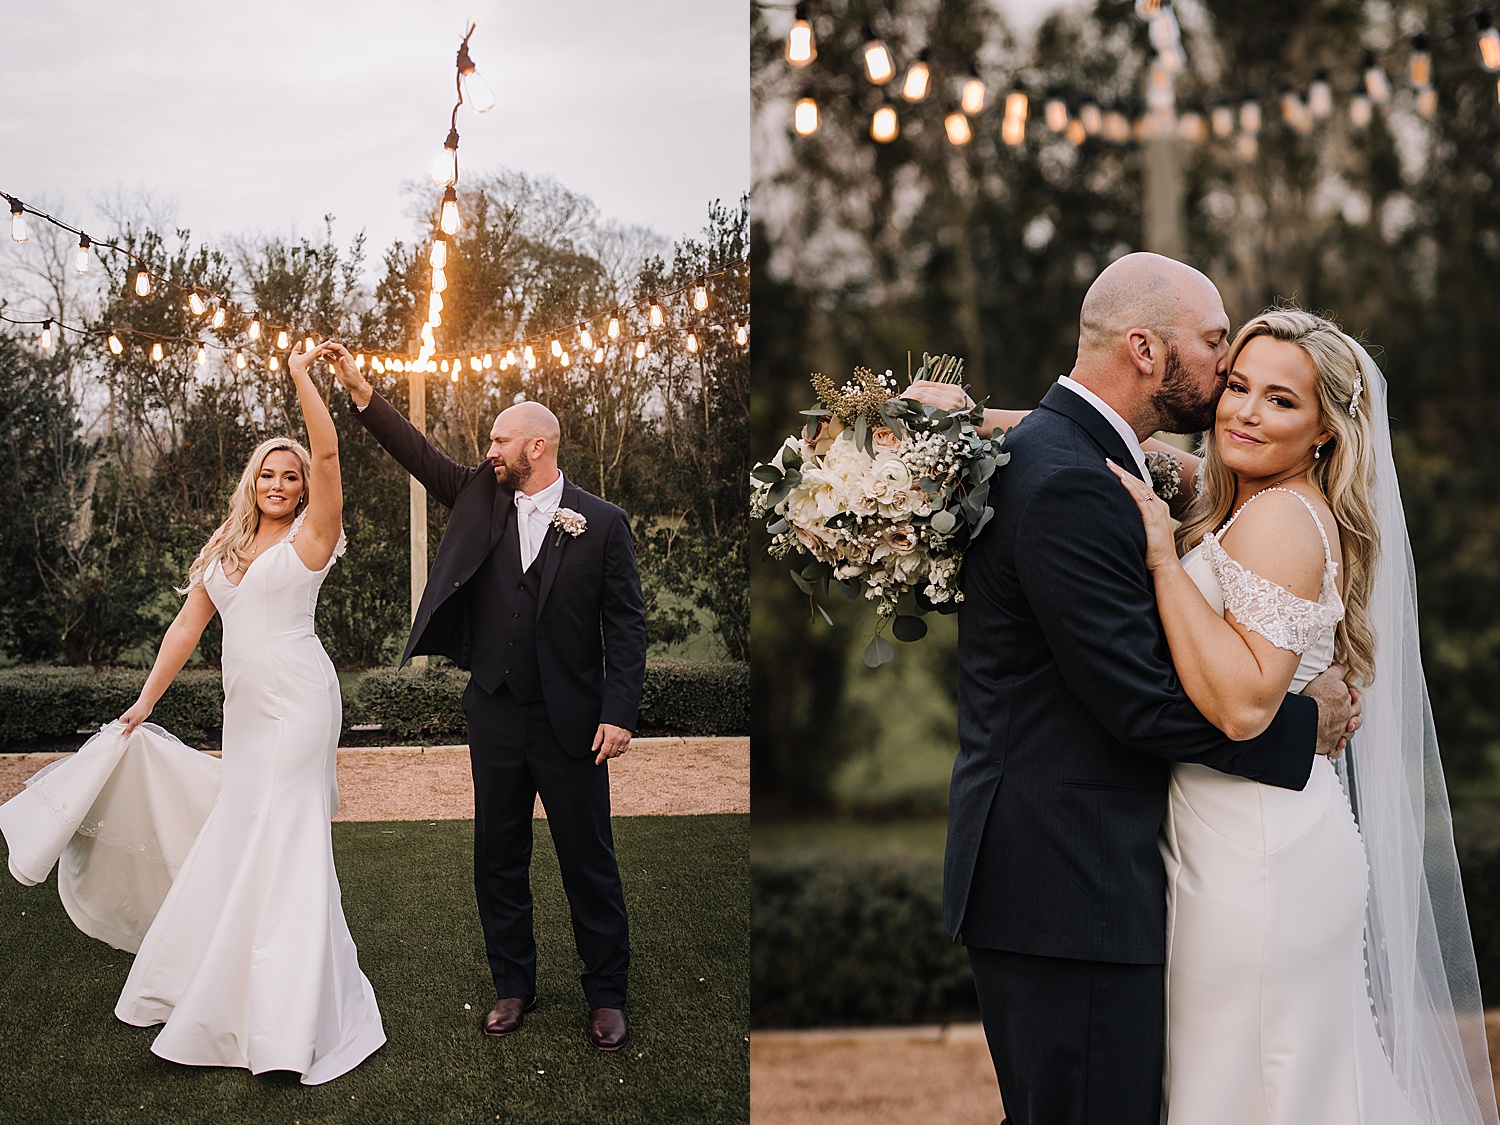 Bride and groom dance under string lights at the farmhouse wedding holding white and green wedding bouquet 